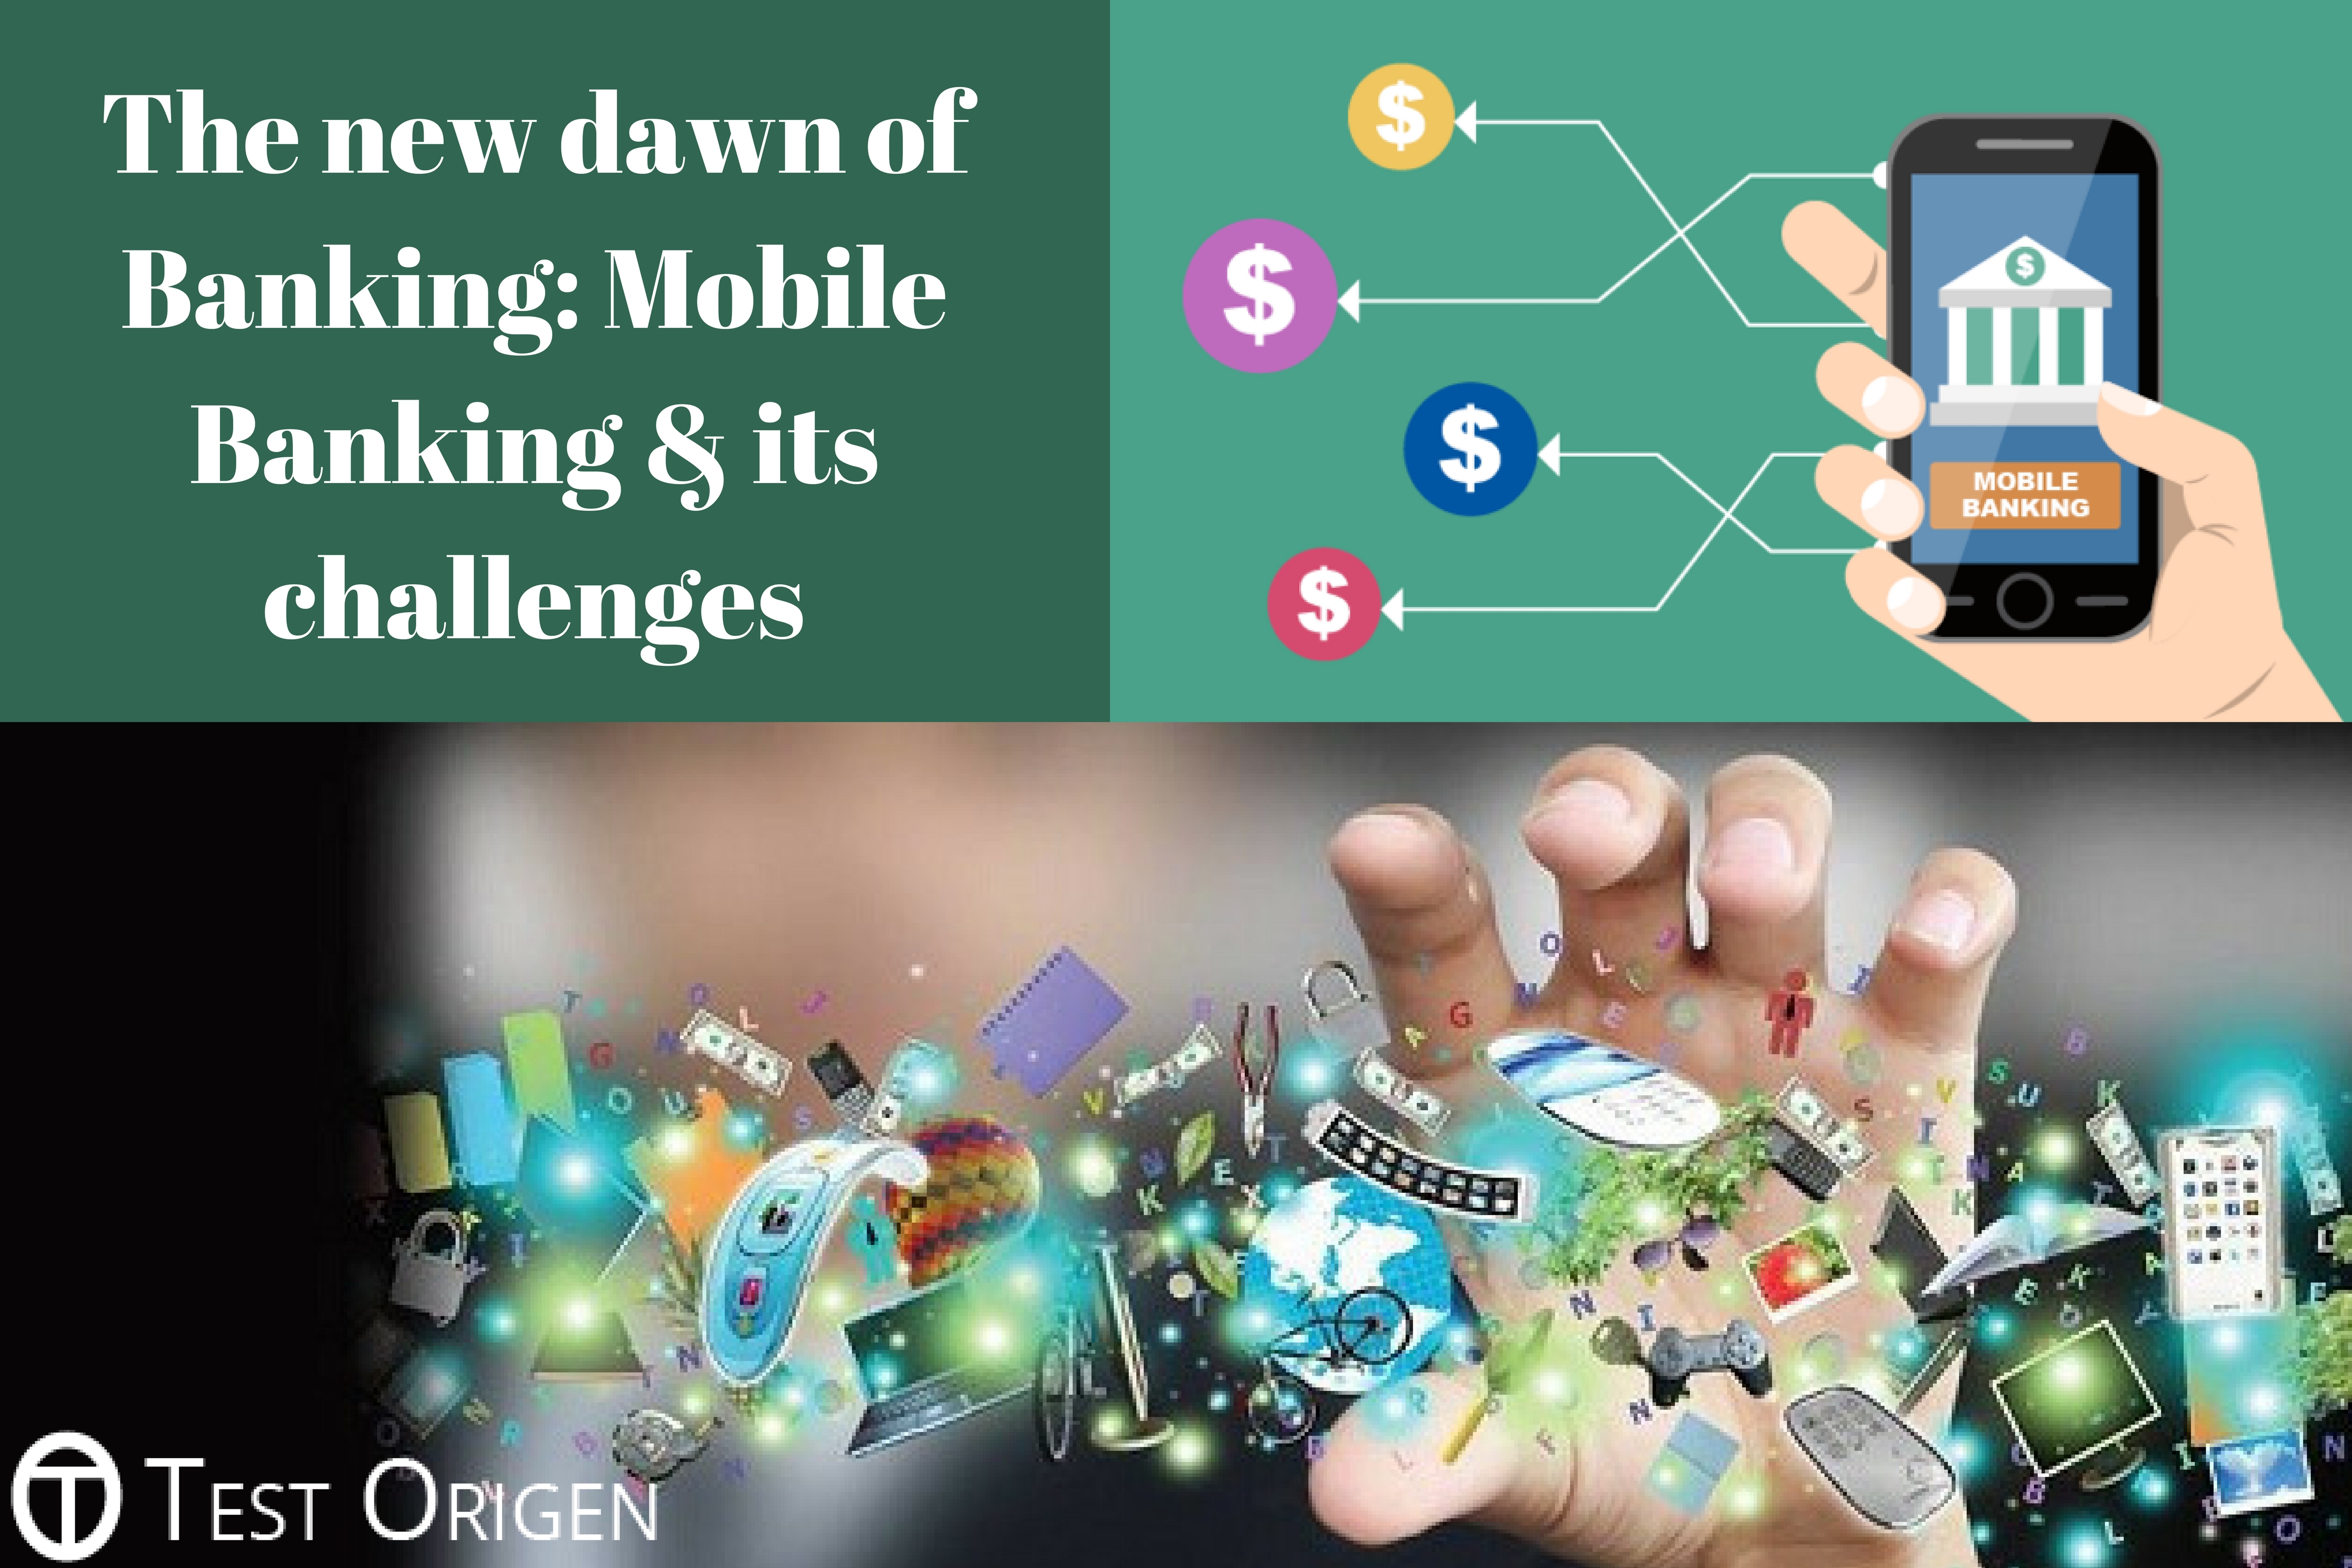 The new dawn of Banking: Mobile Banking & its challenges